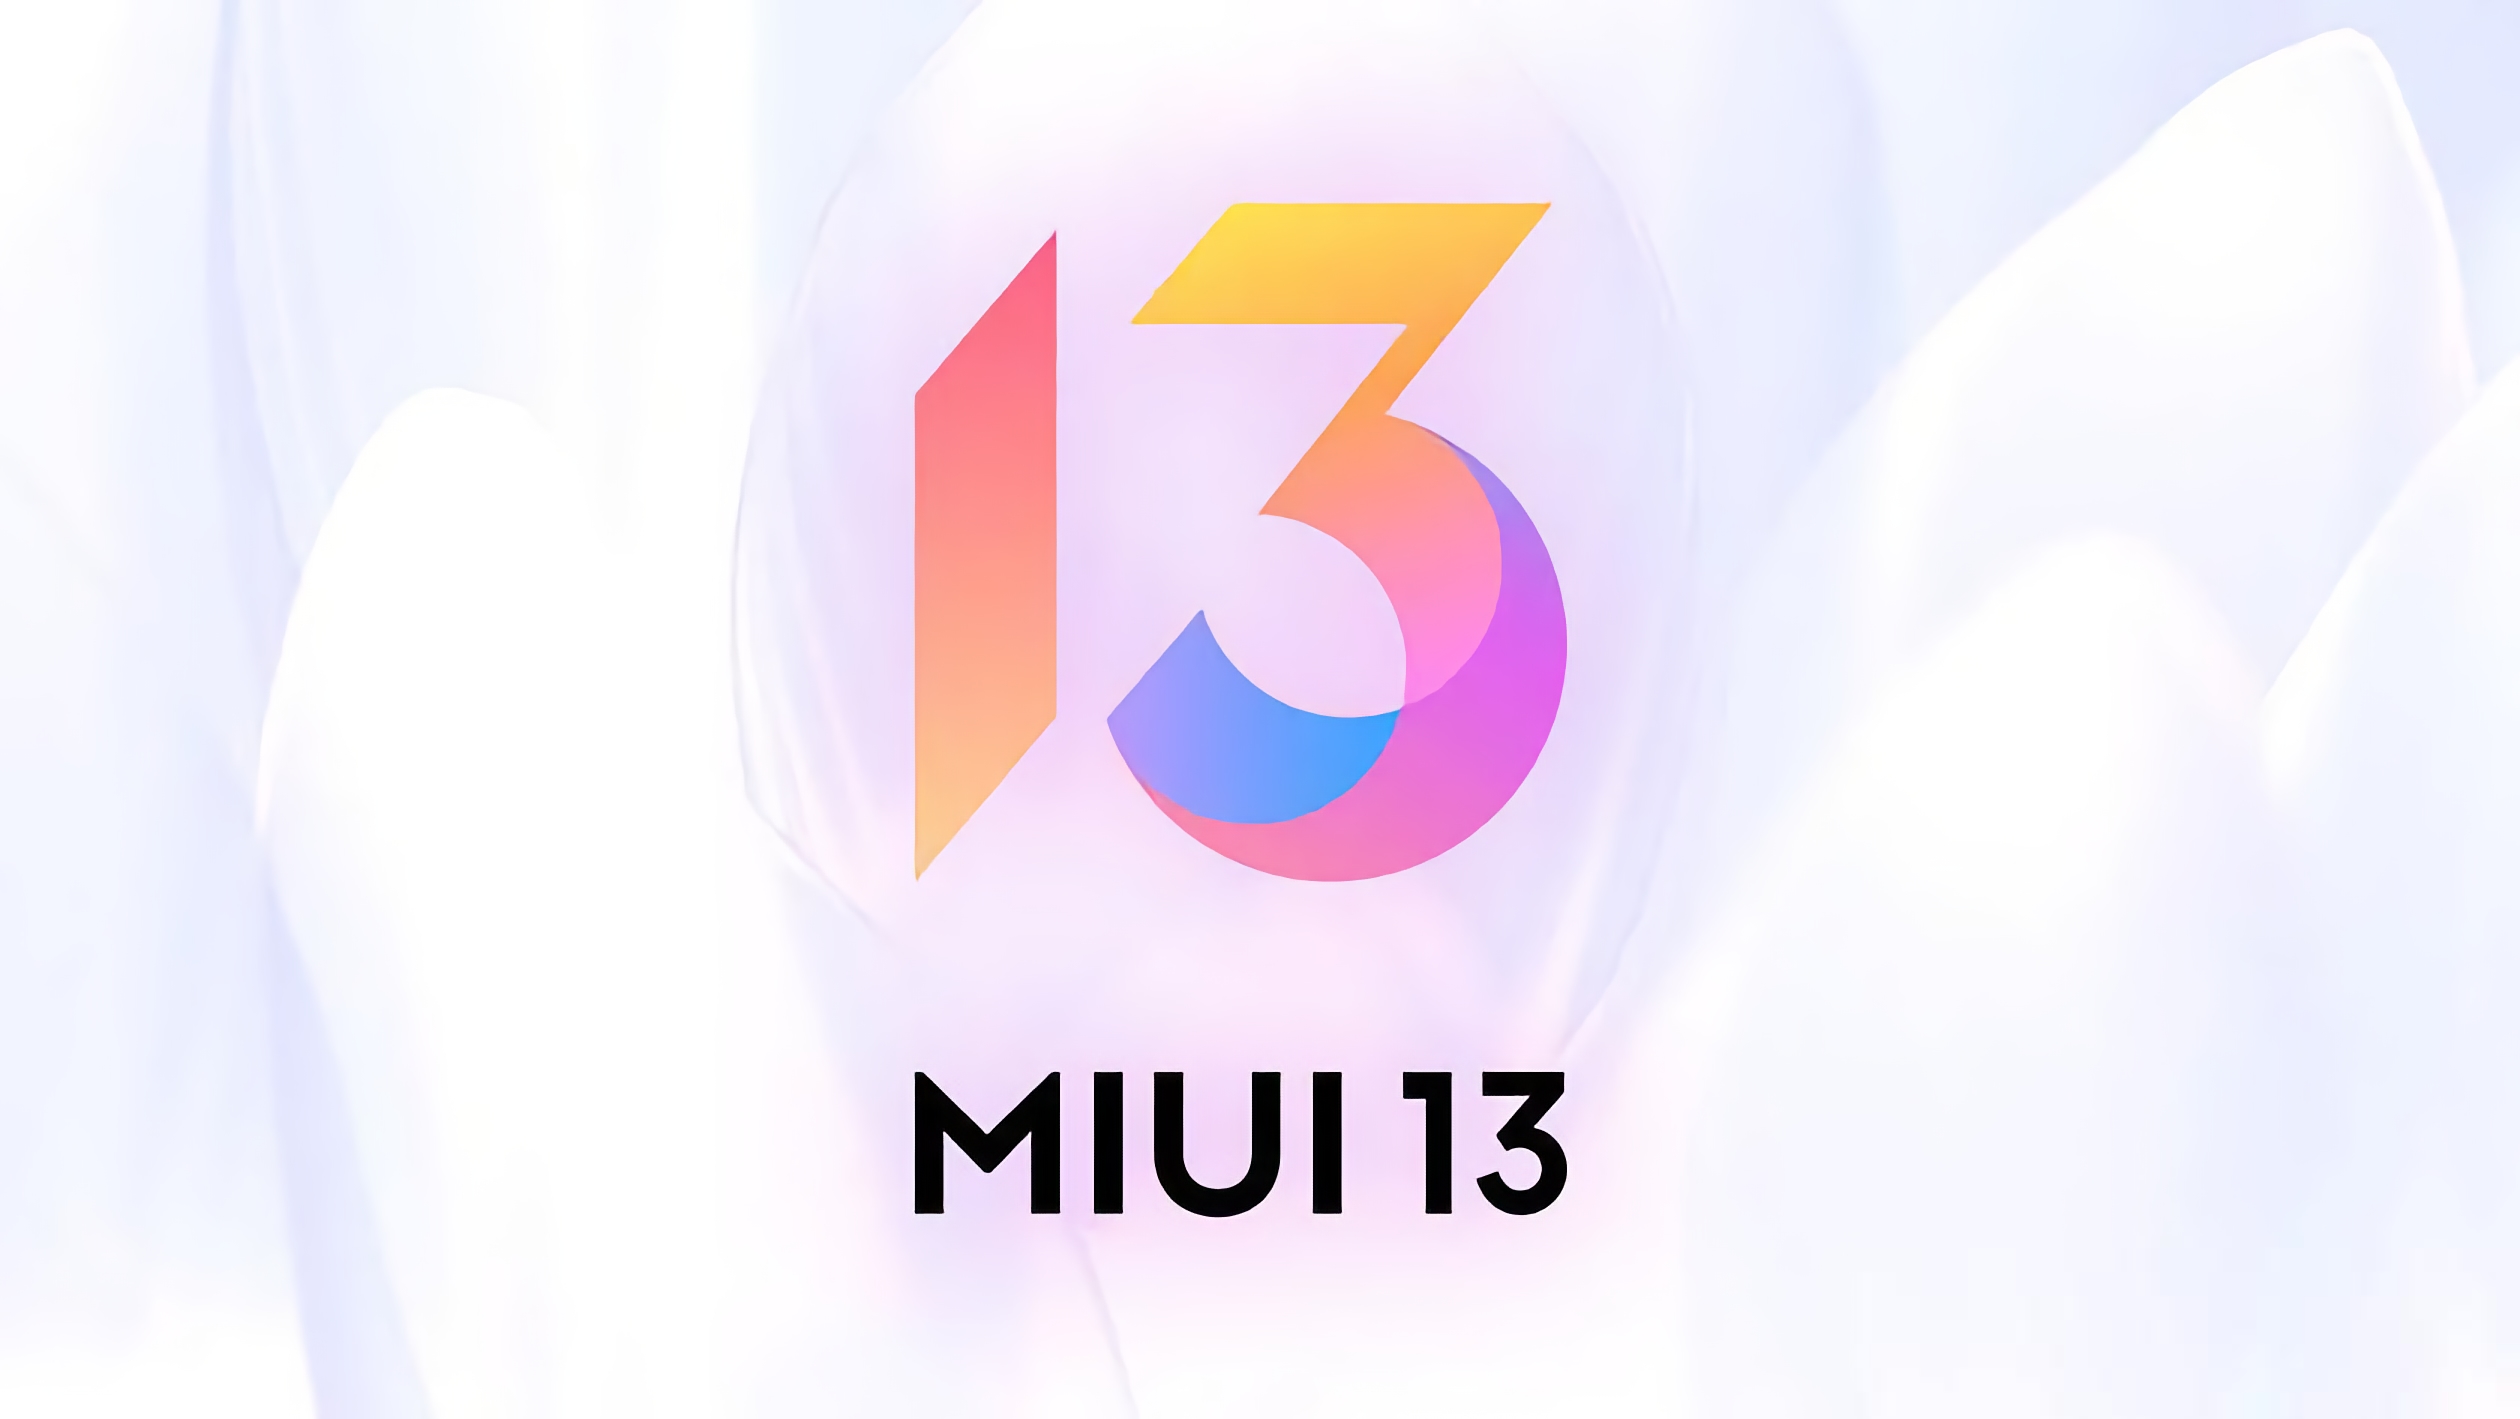 Which smartphones Xiaomi, Redmi and POCO will be the first to receive MIUI 13 in the global market